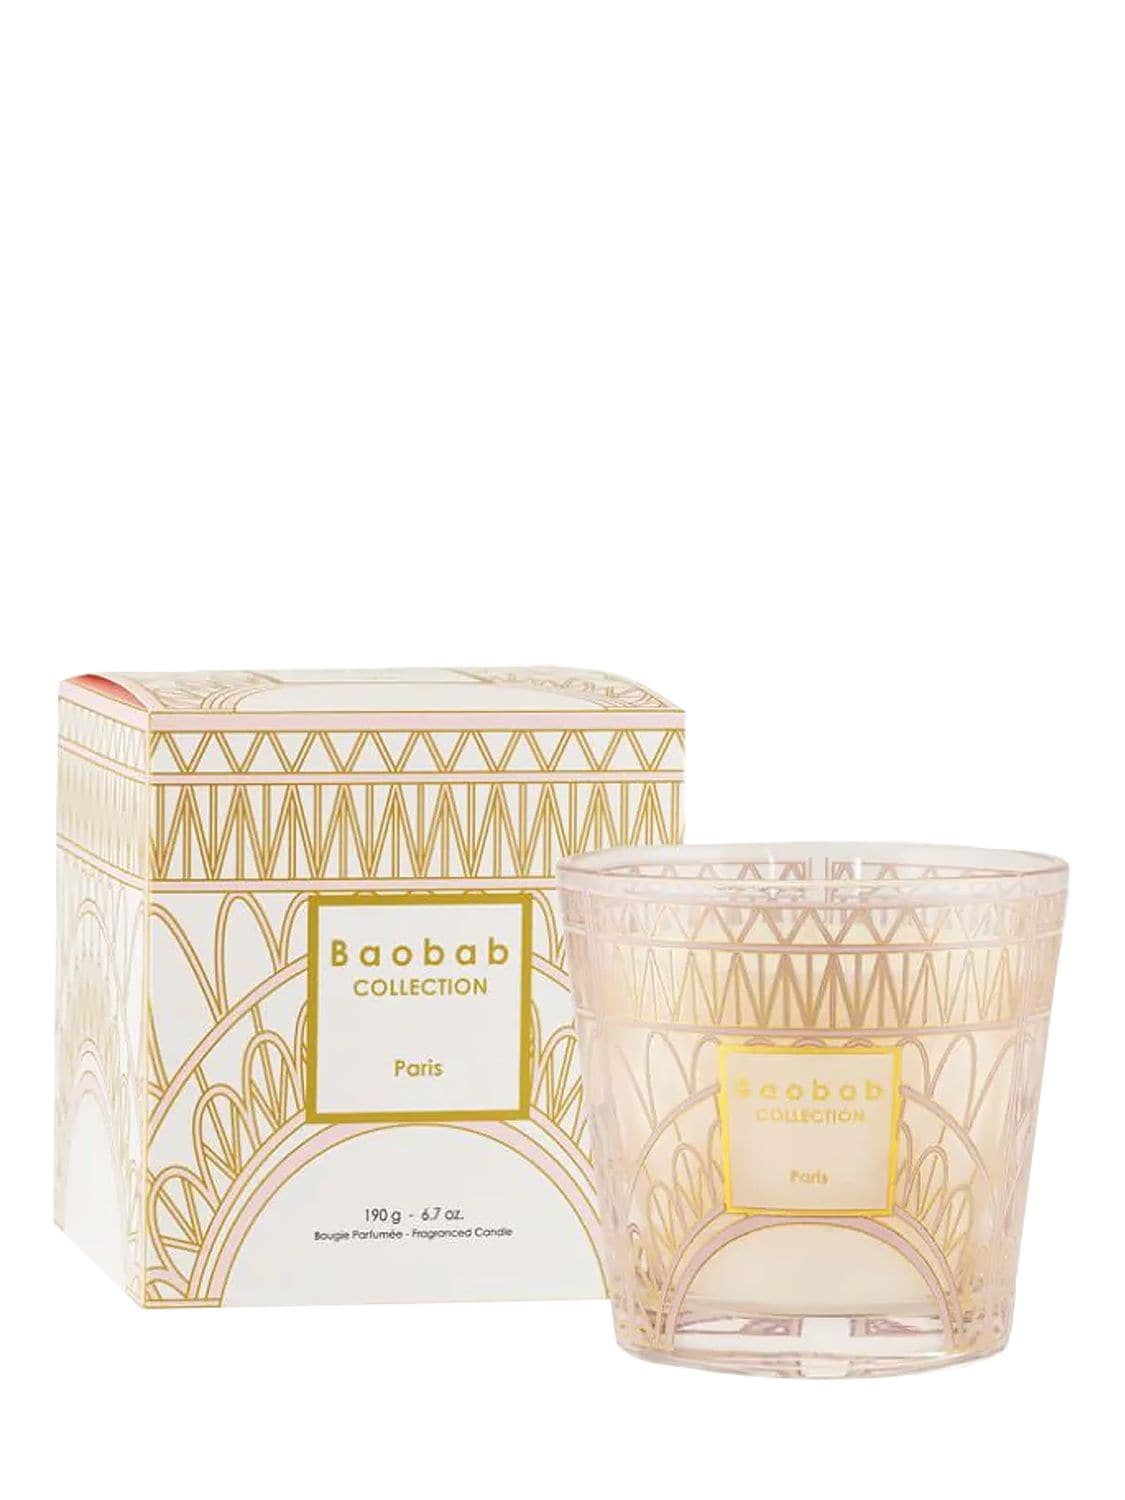 Baobab Collection 190gr My Firsts Baobob Paris Candle In Pink